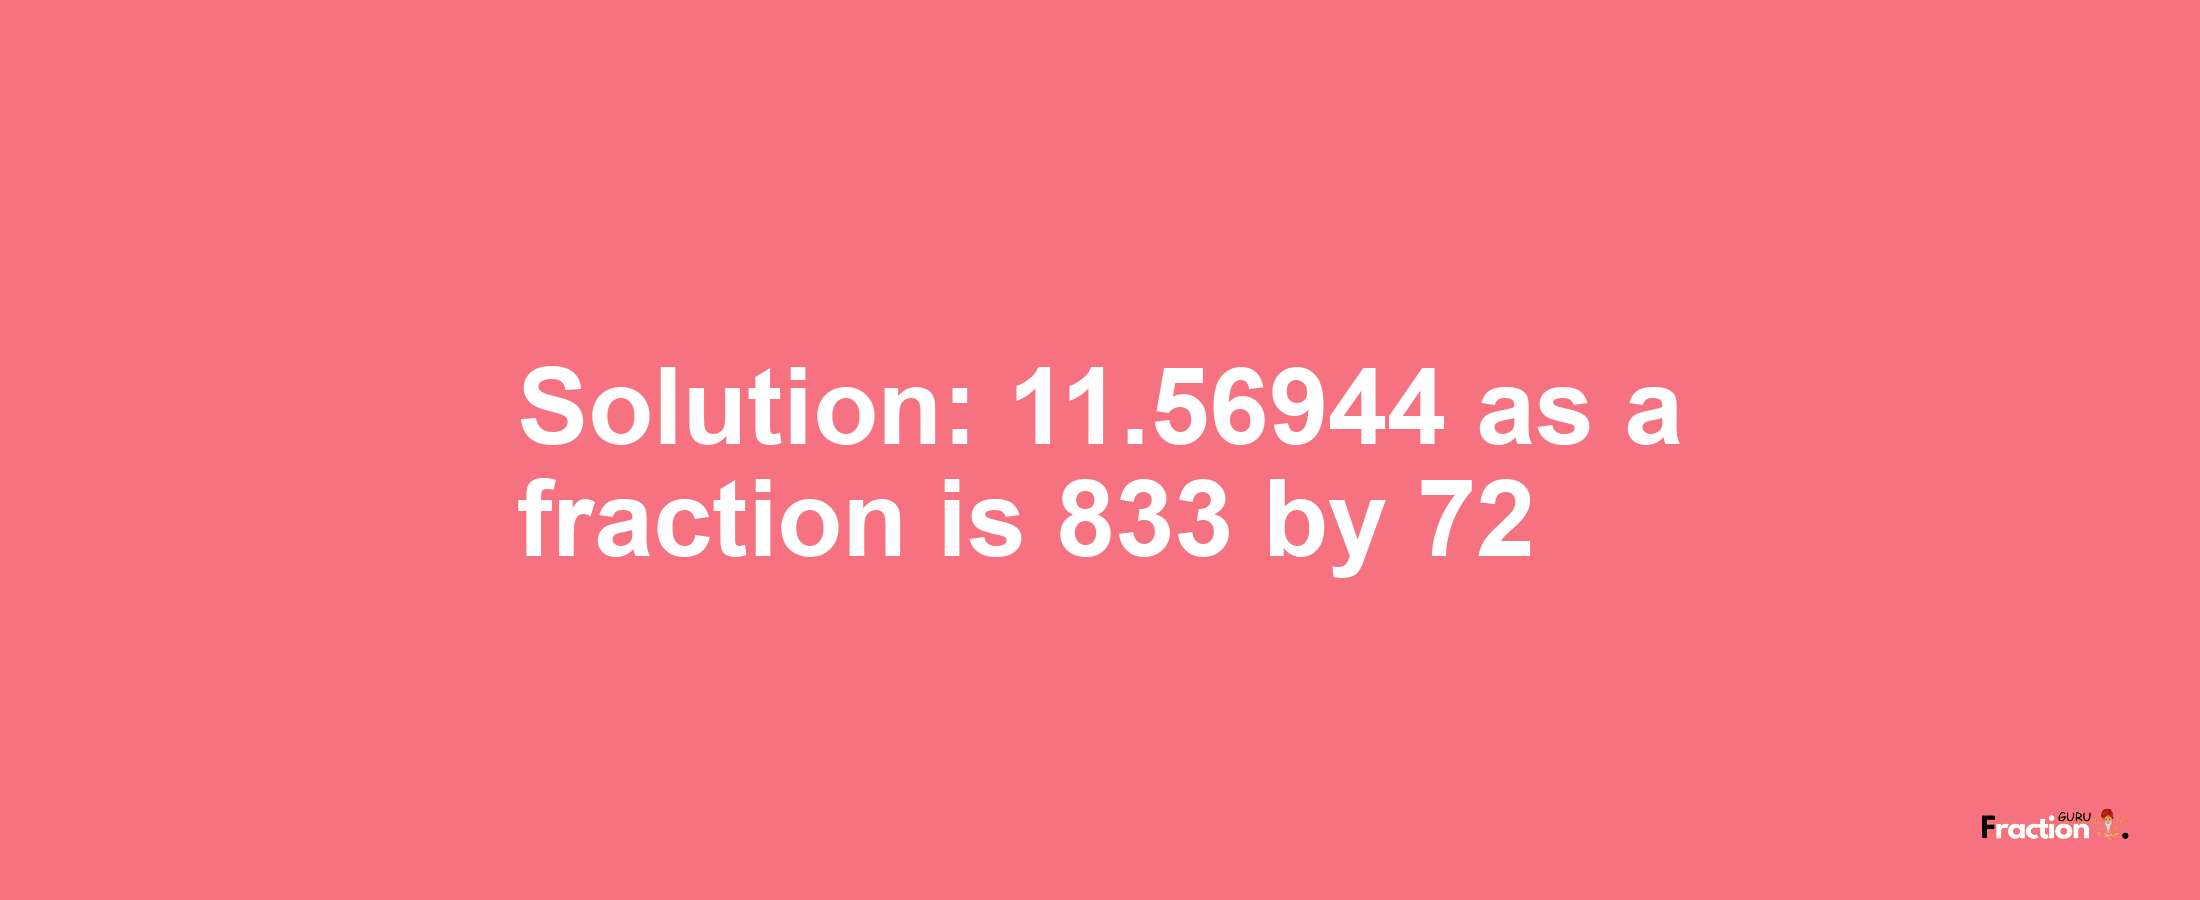 Solution:11.56944 as a fraction is 833/72